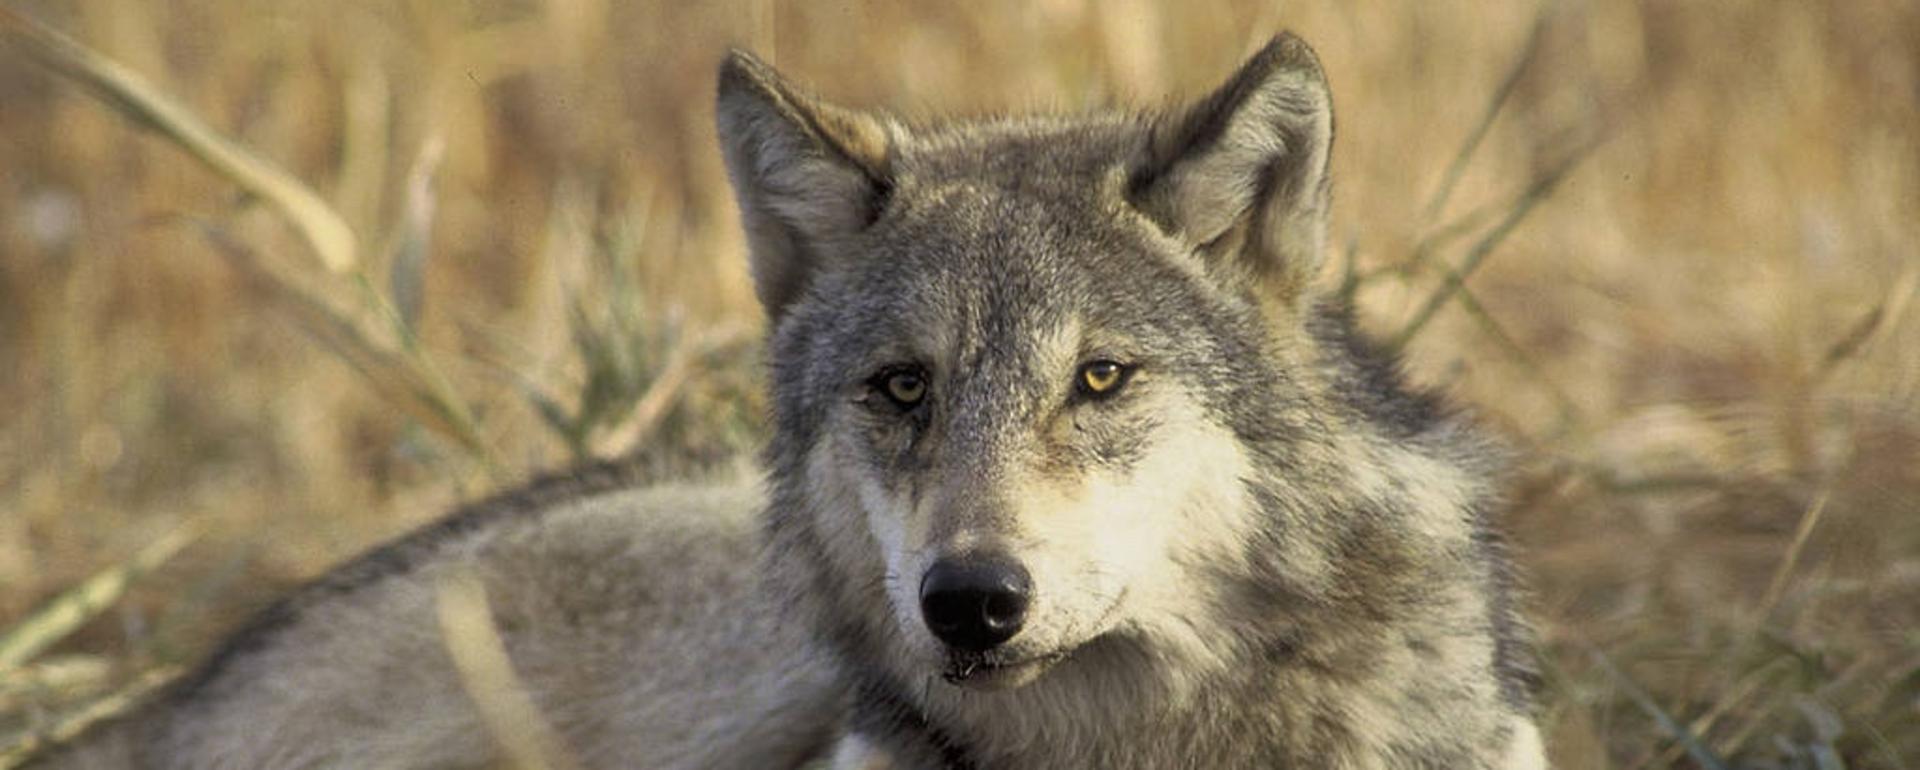 Yellowstone wolves have already needlessly been killed